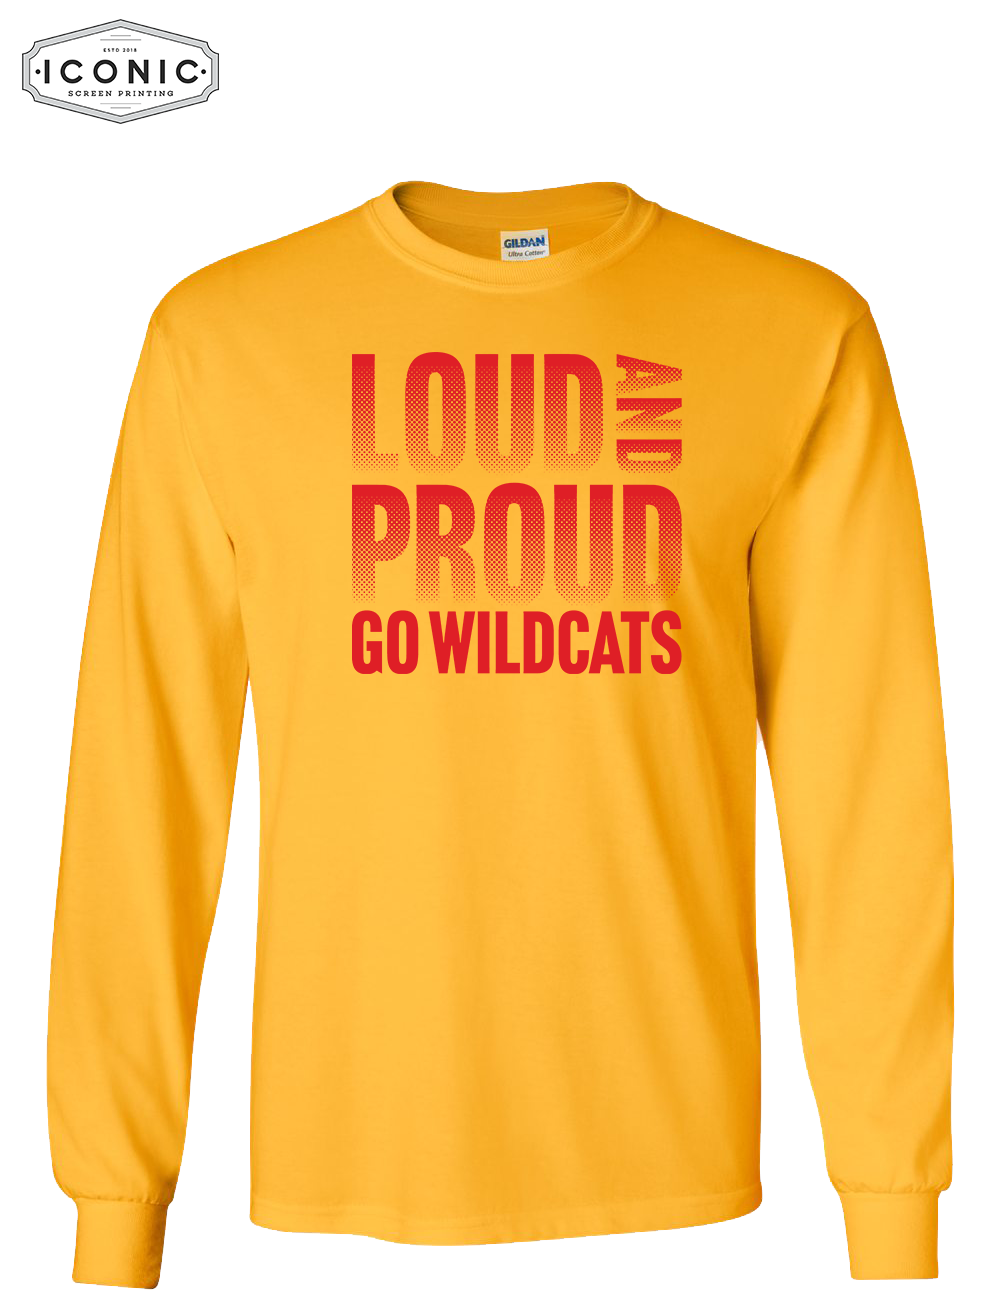 Loud And Proud - Ultra Cotton Long Sleeve